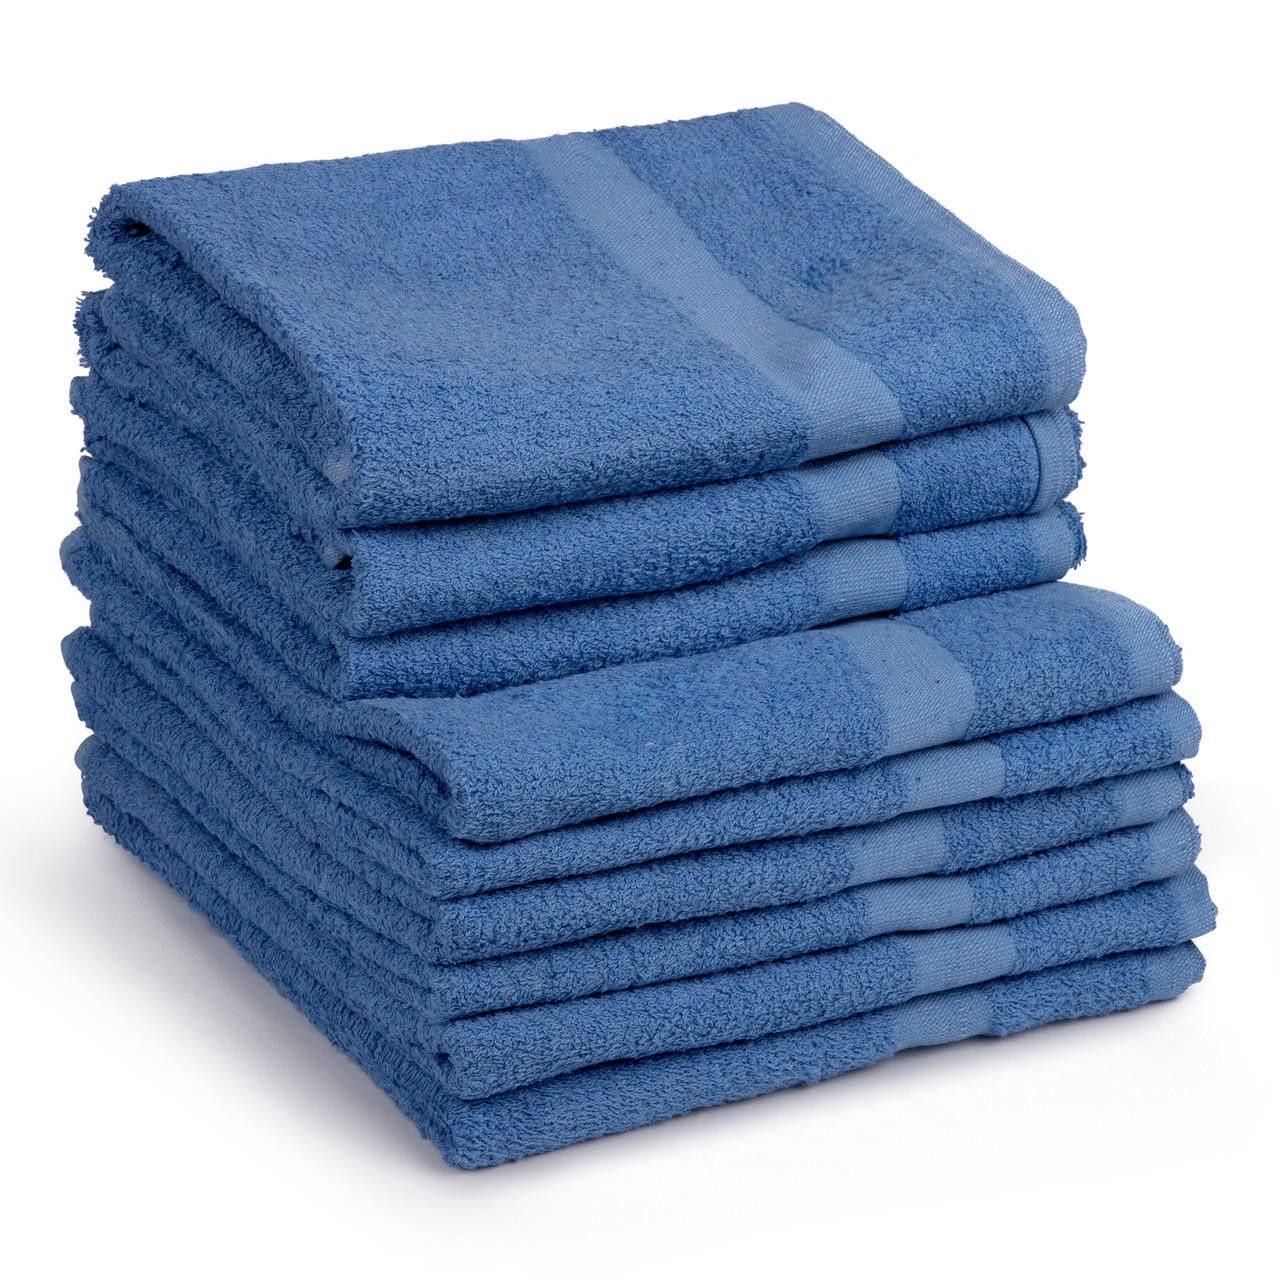 How is the packing done for blue washcloths in bulk from the Blue Towel Collection, 16s?